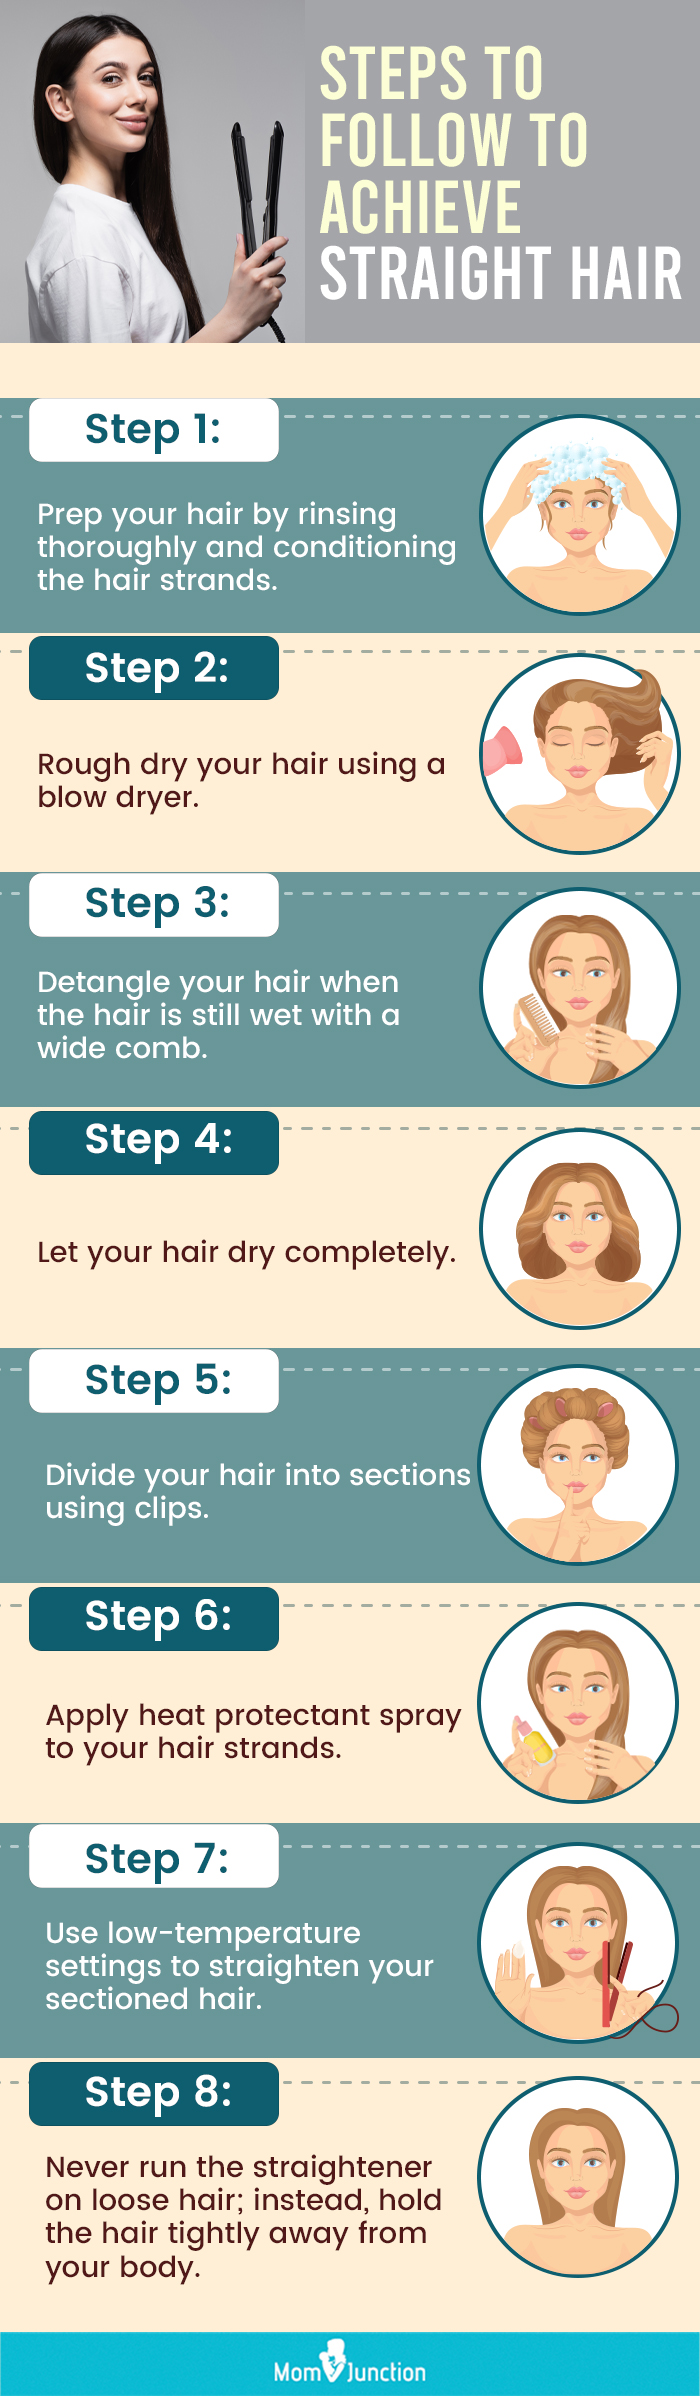 Steps To Follow To Achieve Straight Hair (infographic)